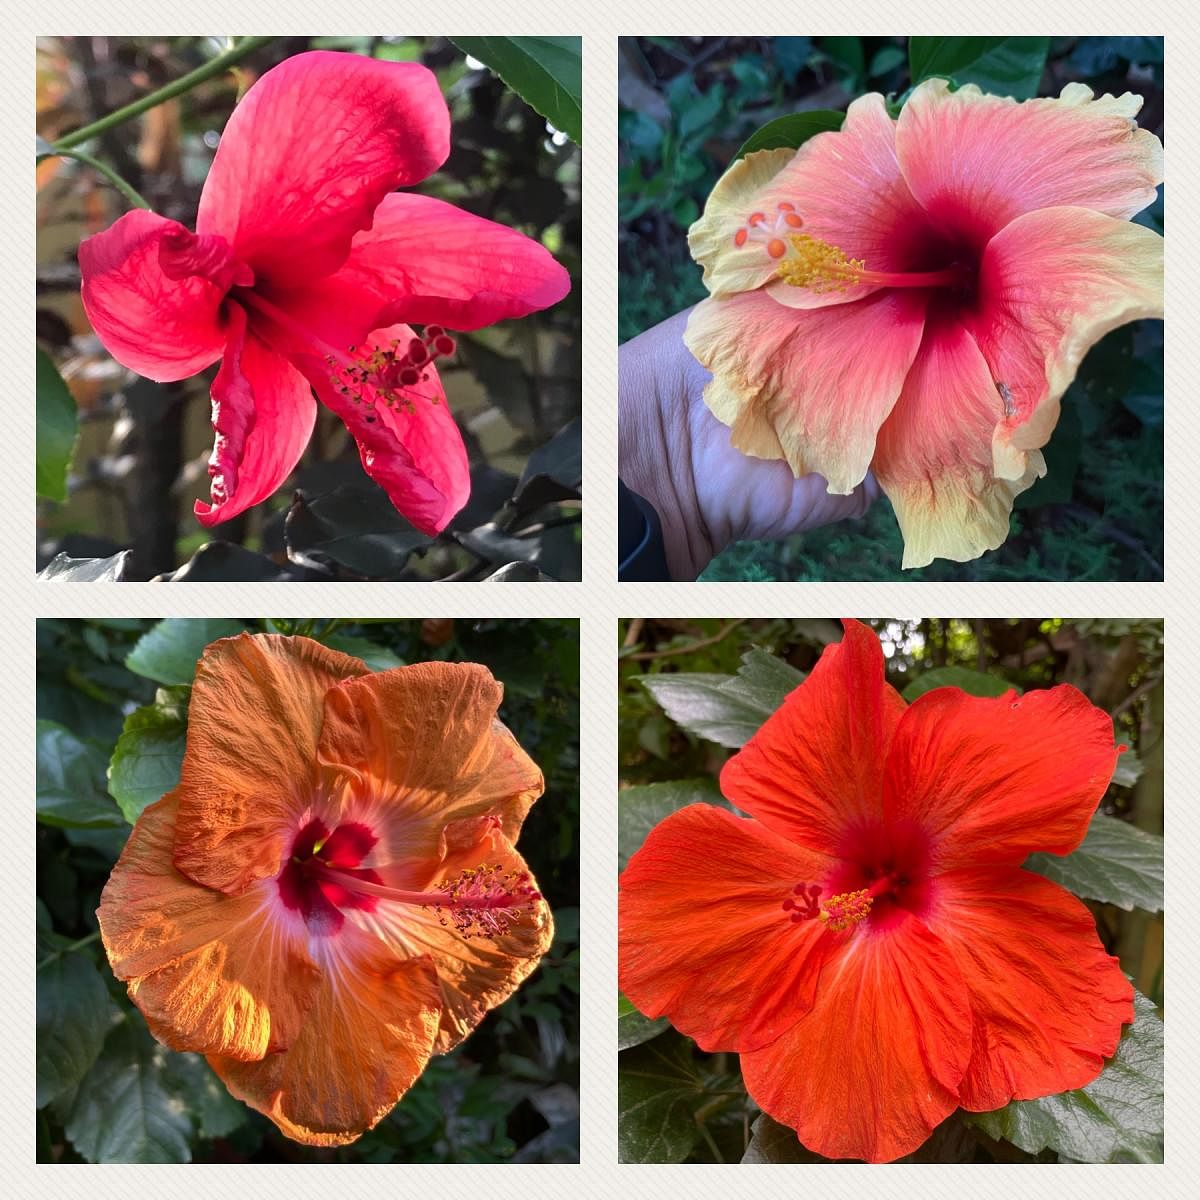 The hibiscus comes in a profusion of colours